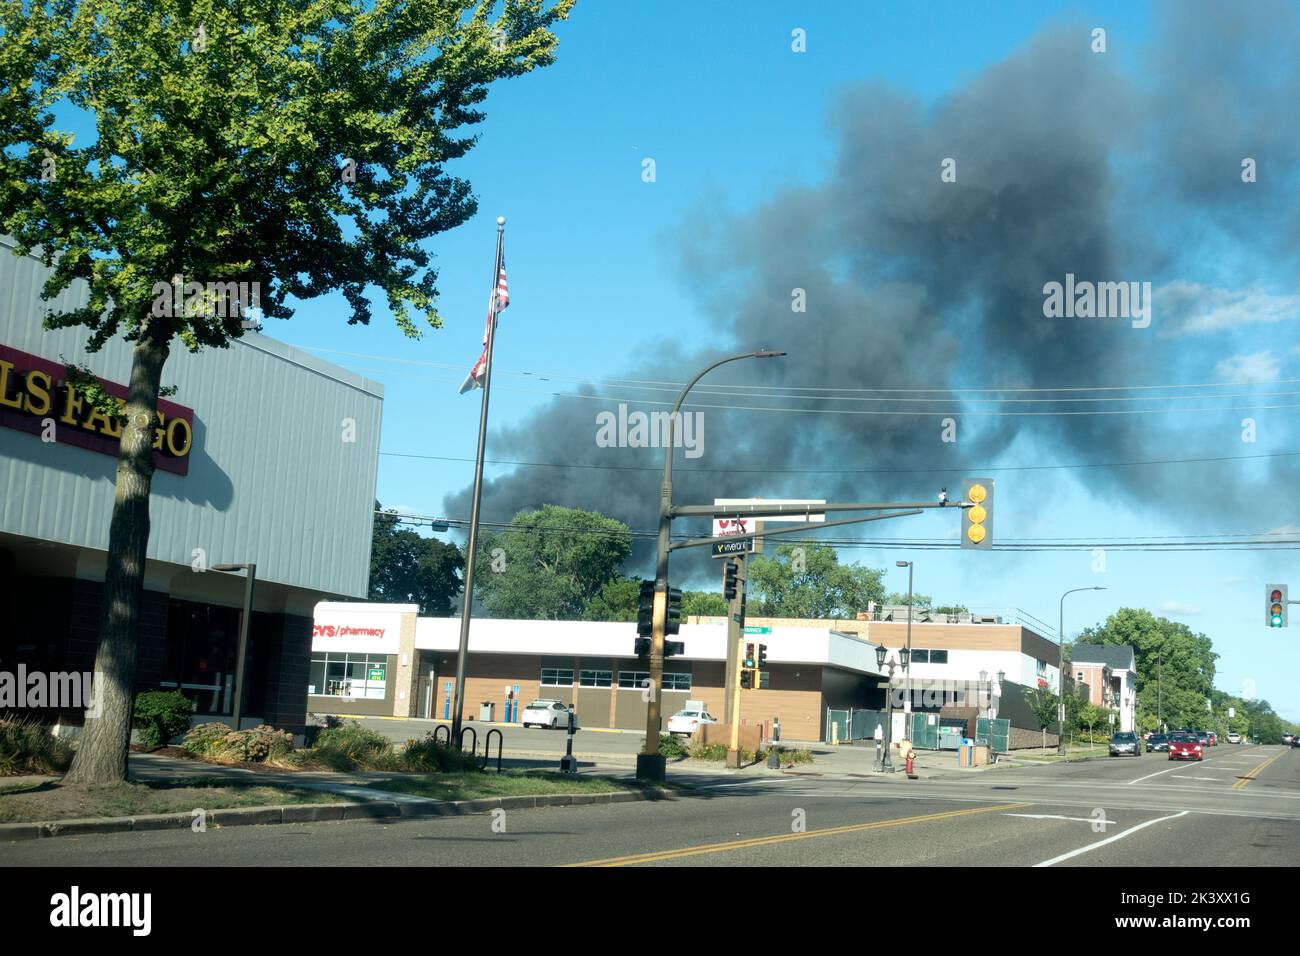 Sky filled with black smoke from a fire at a storage shed. St Paul Minnesota MN USA Stock Photo